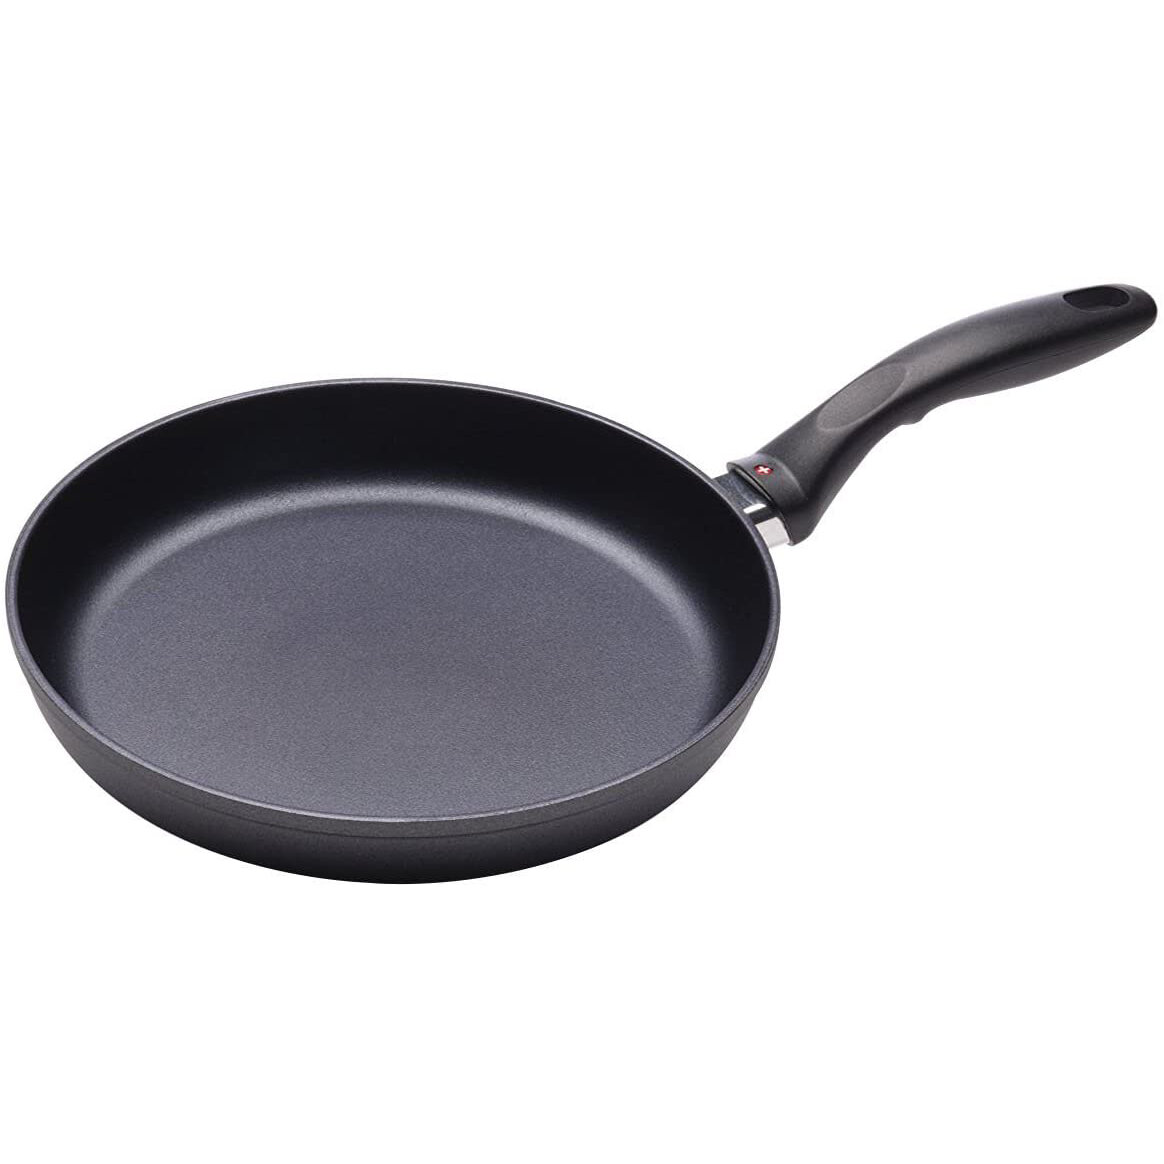 8 Inches Swiss Diamond HD Classic Nonstick Frying Pan Skillet Cookware Black 